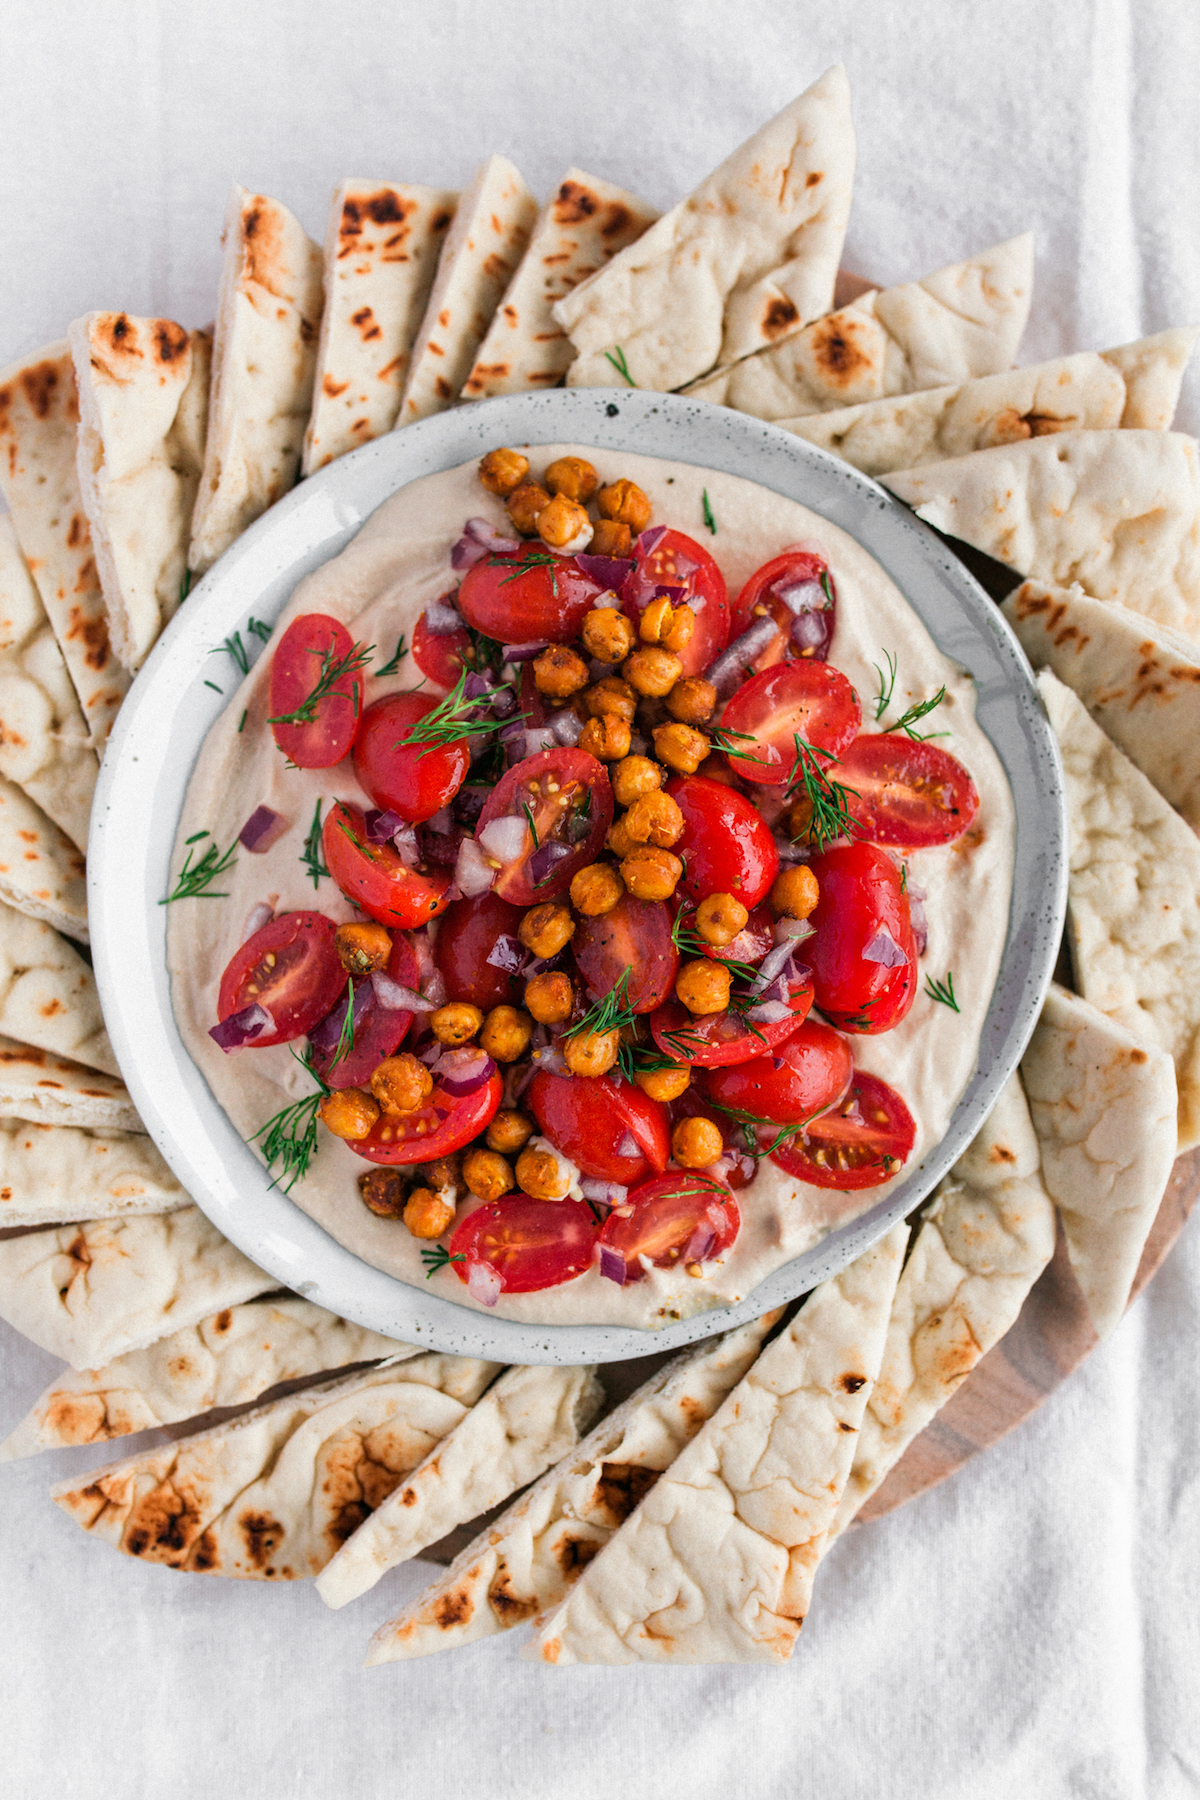 Easy hummus party platter for any season - whip it up in about an hour and impress your guests! | bygabriella.co @gabivalladares